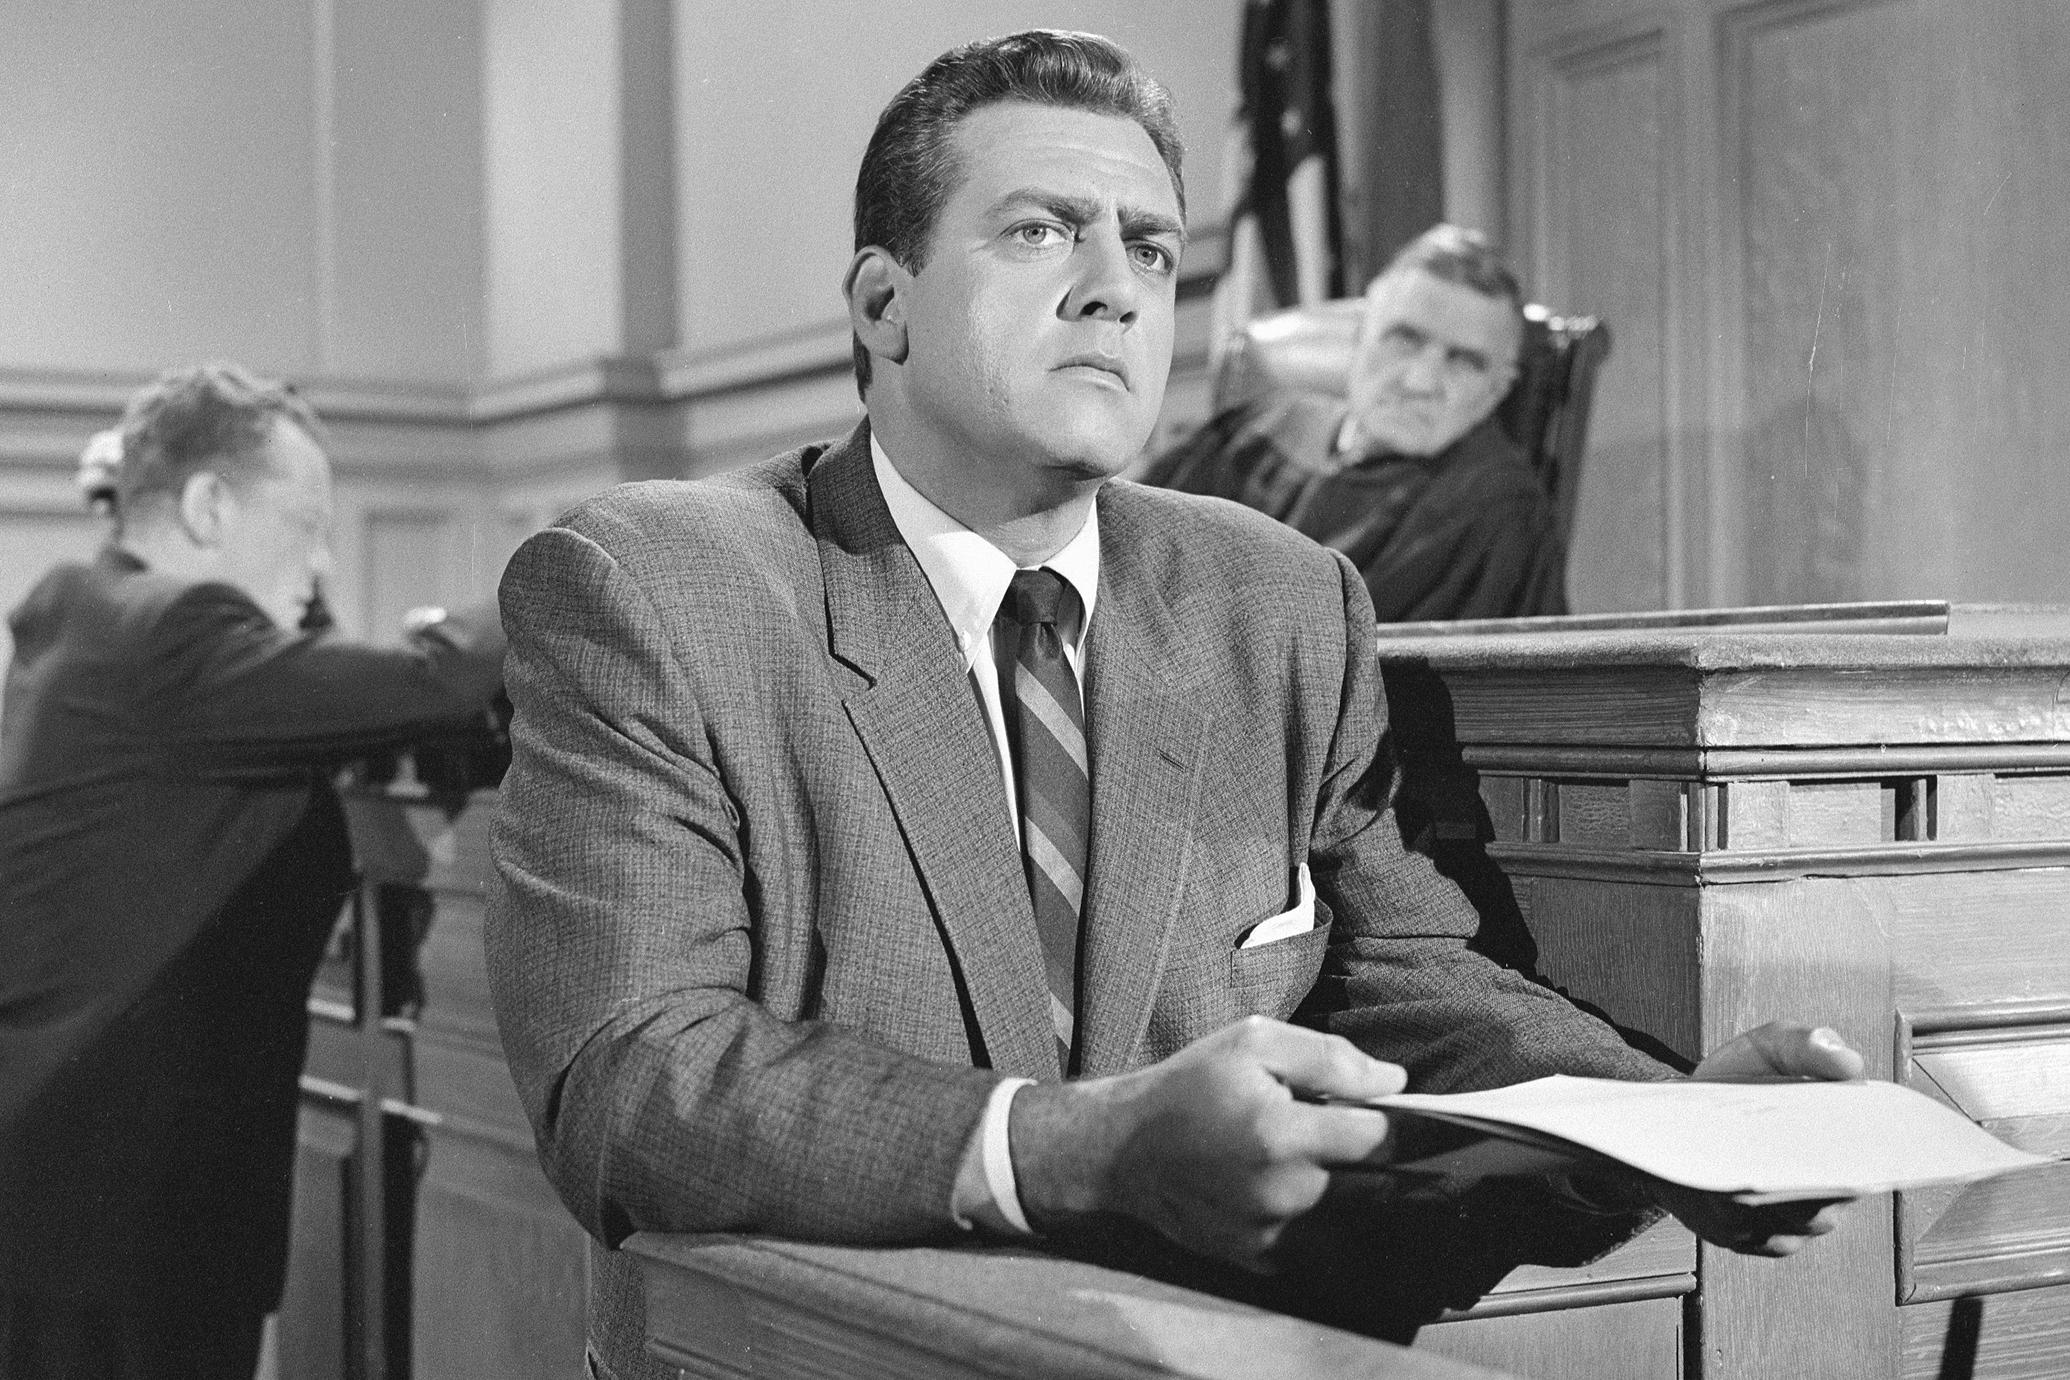 HBO has handed out a limited series order to Team Downey's Perry Mason reboot